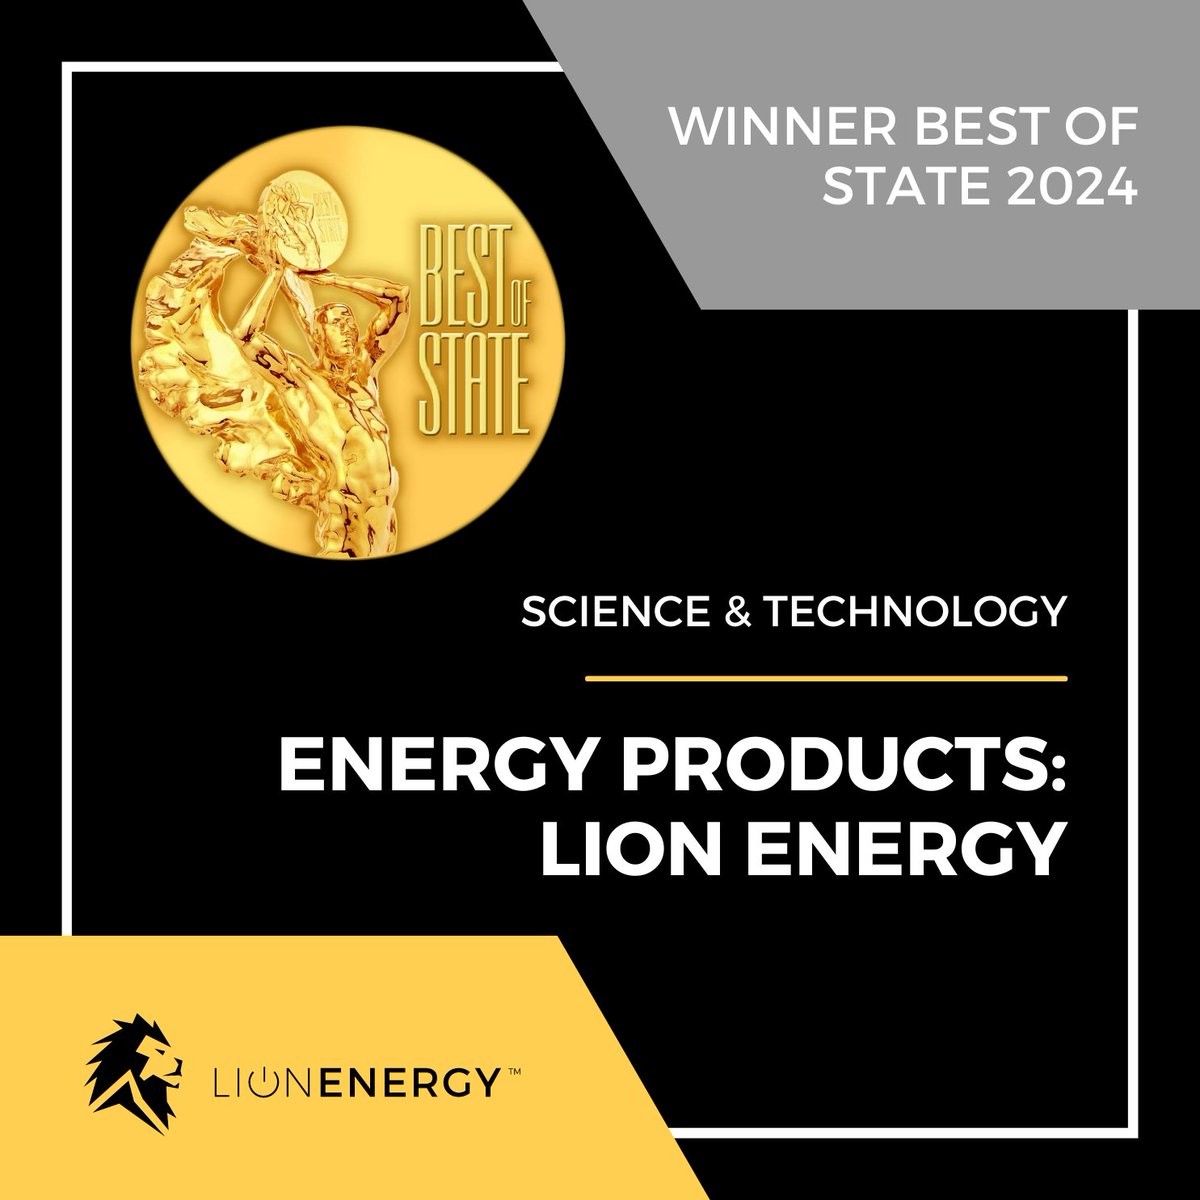 Lion Energy won Best Energy Products at the @BestOfState Awards. We are honored to be recognized alongside the many outstanding businesses in Utah, and are inspired to continue to bring the best possible energy solutions to you.
#Lionenergy #energyindependence #cleanenergy